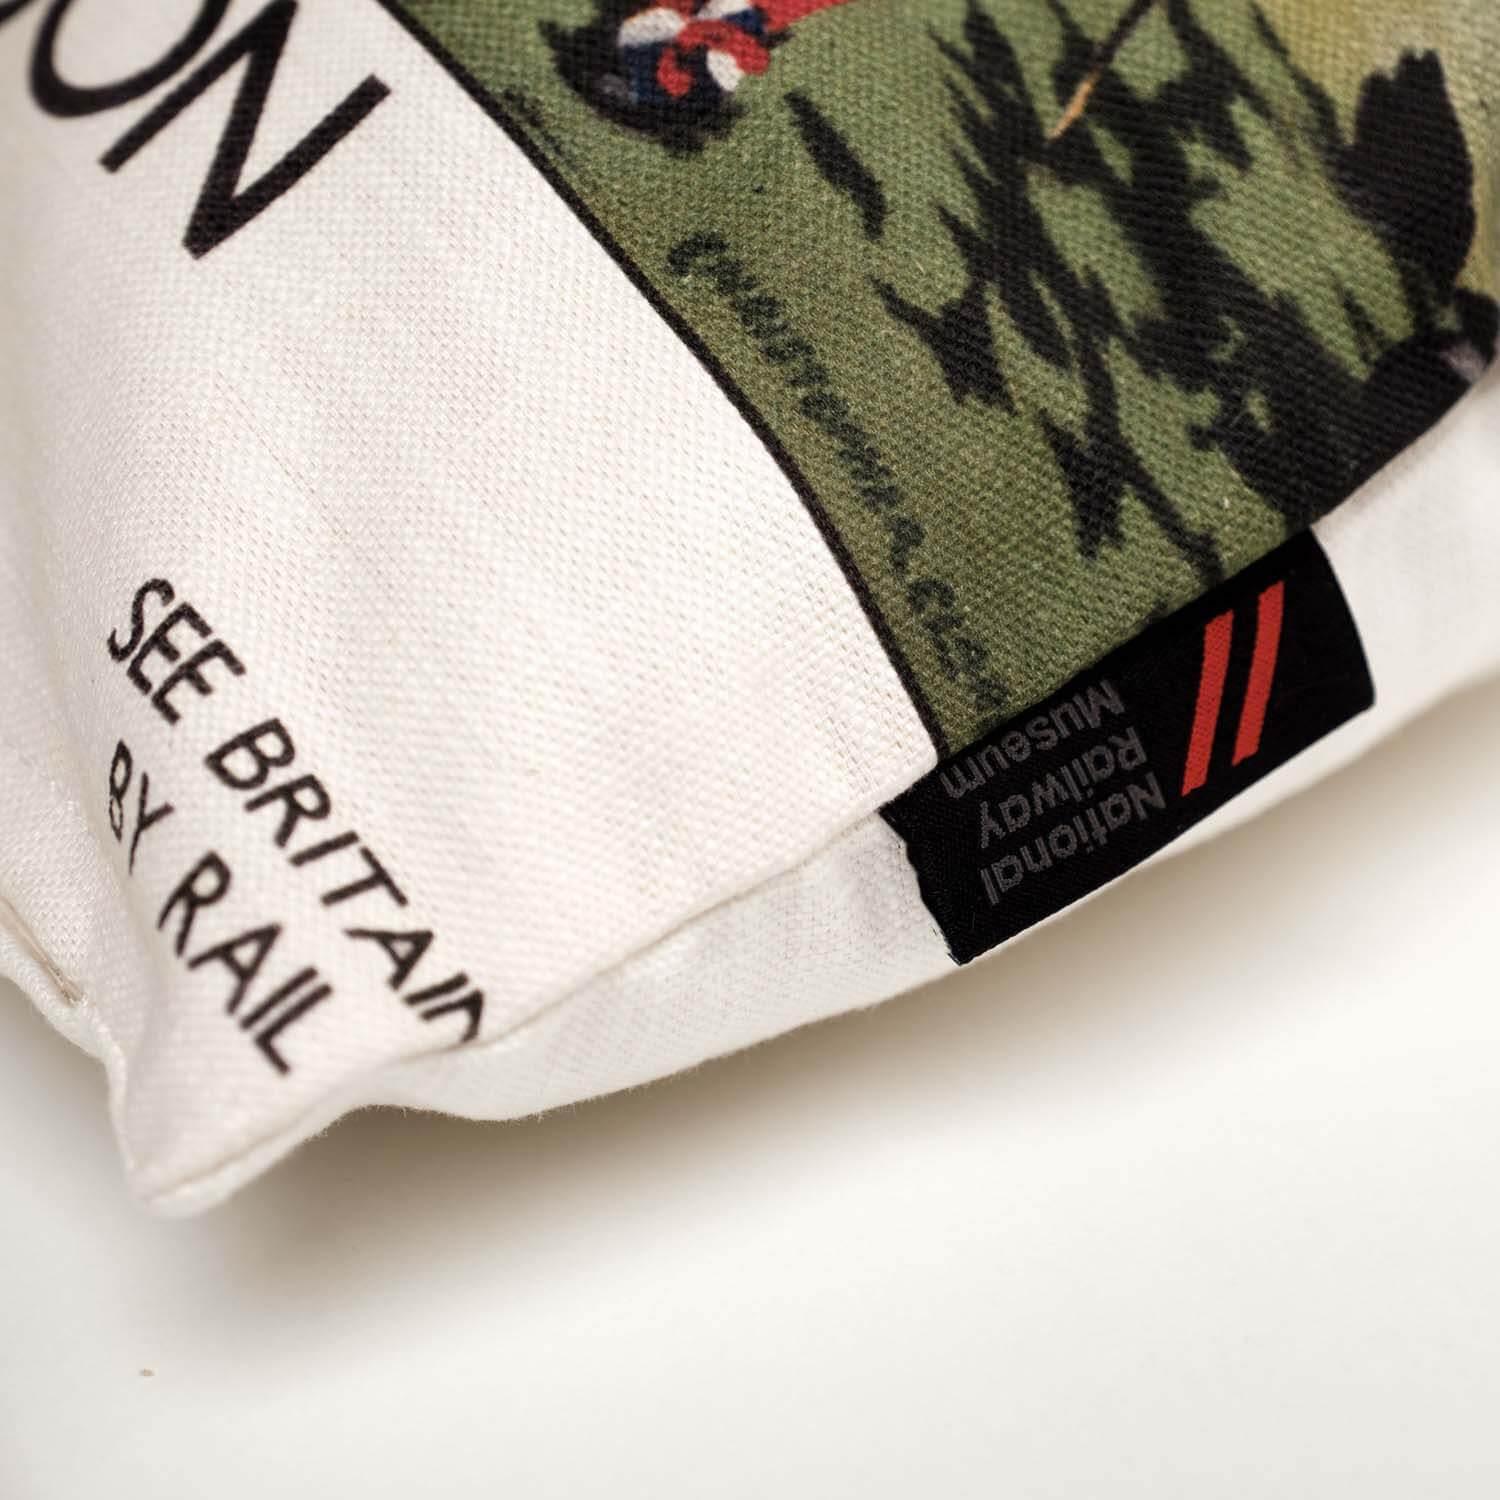 The English Lakes Scafell And Wastwater LMS 1930s - National Railway Museum Cushion - Handmade Cushions UK - WeLoveCushions